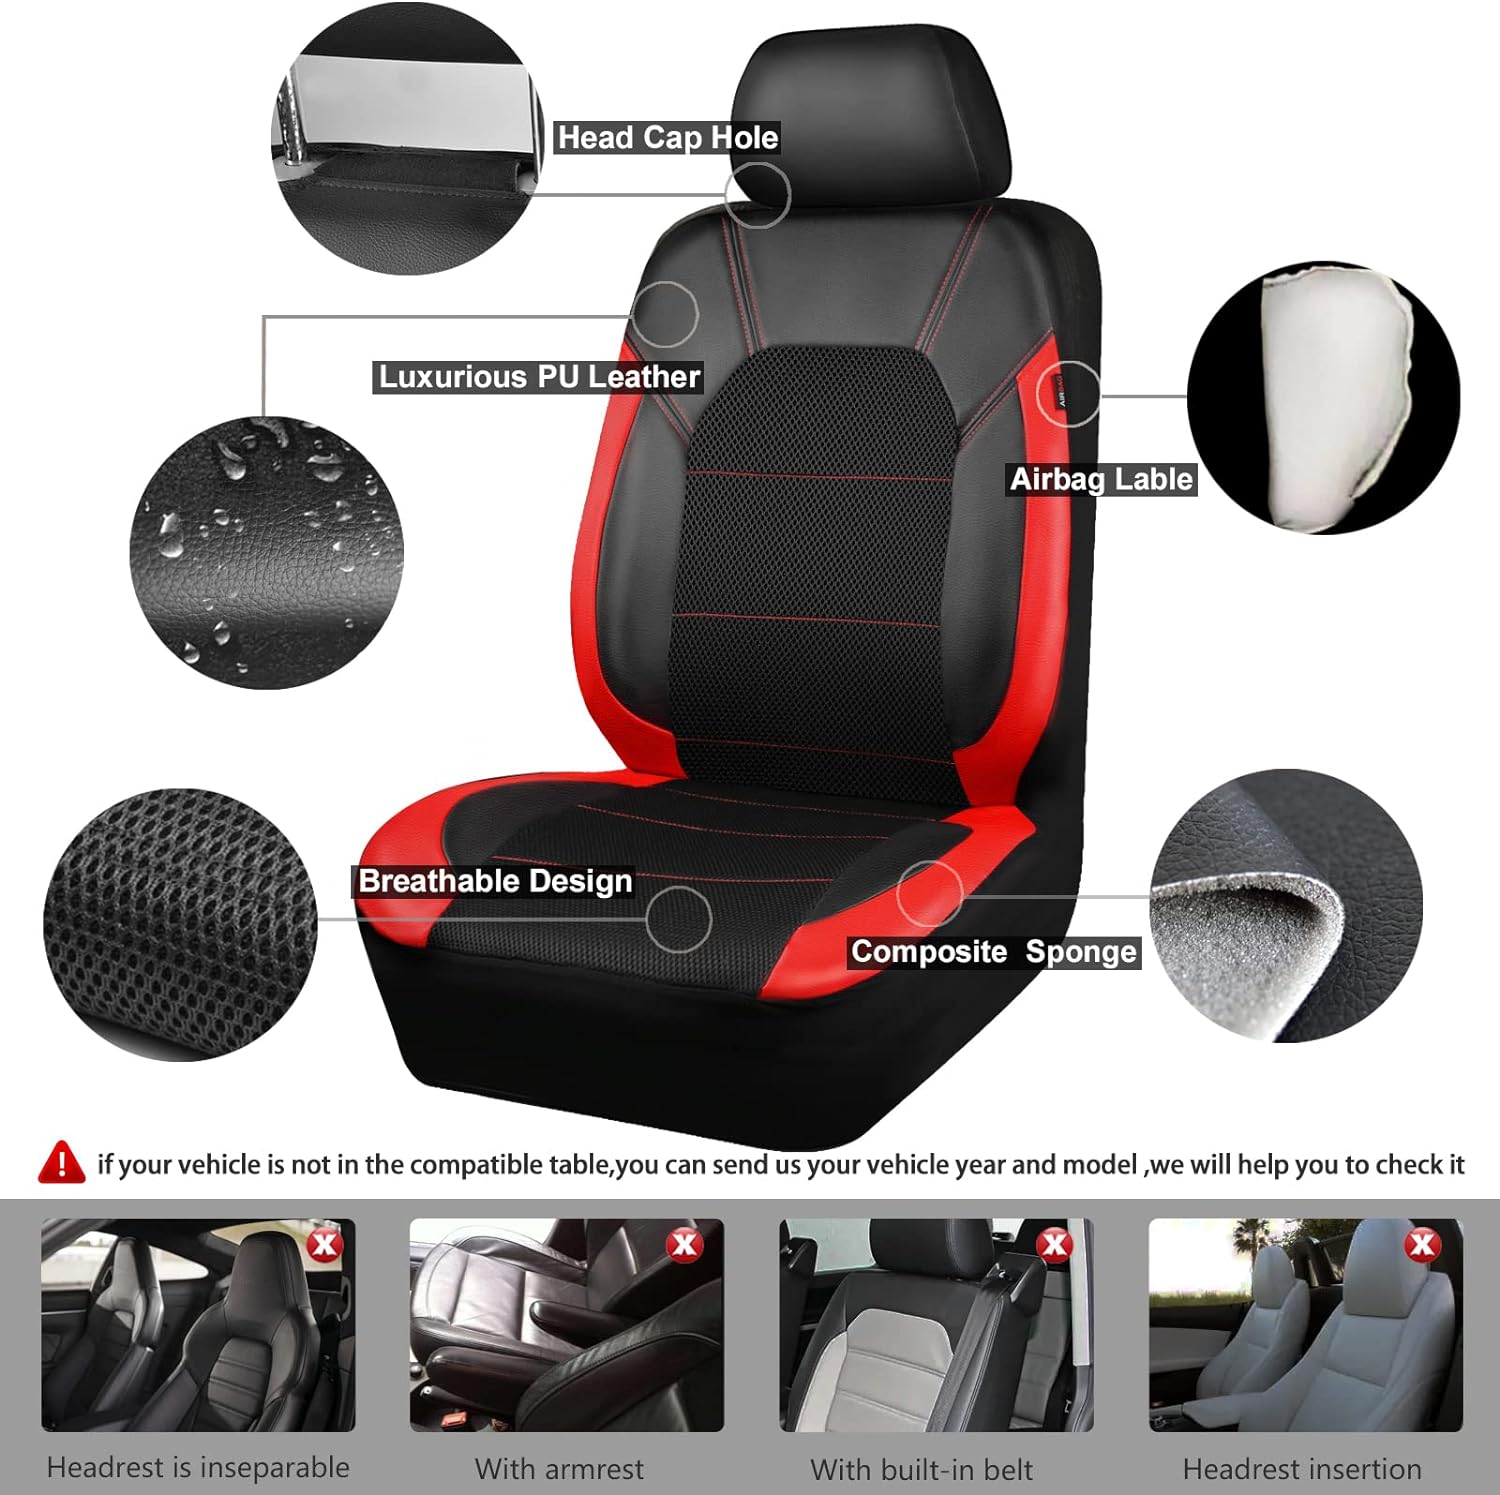 CAR PASS Leather Steering Wheel Cover and Waterproof Car Floor Mats, Universal Leather Two Front Seat Covers its Most Cars, SUVs, Trucks, and Vans (Black and Red)